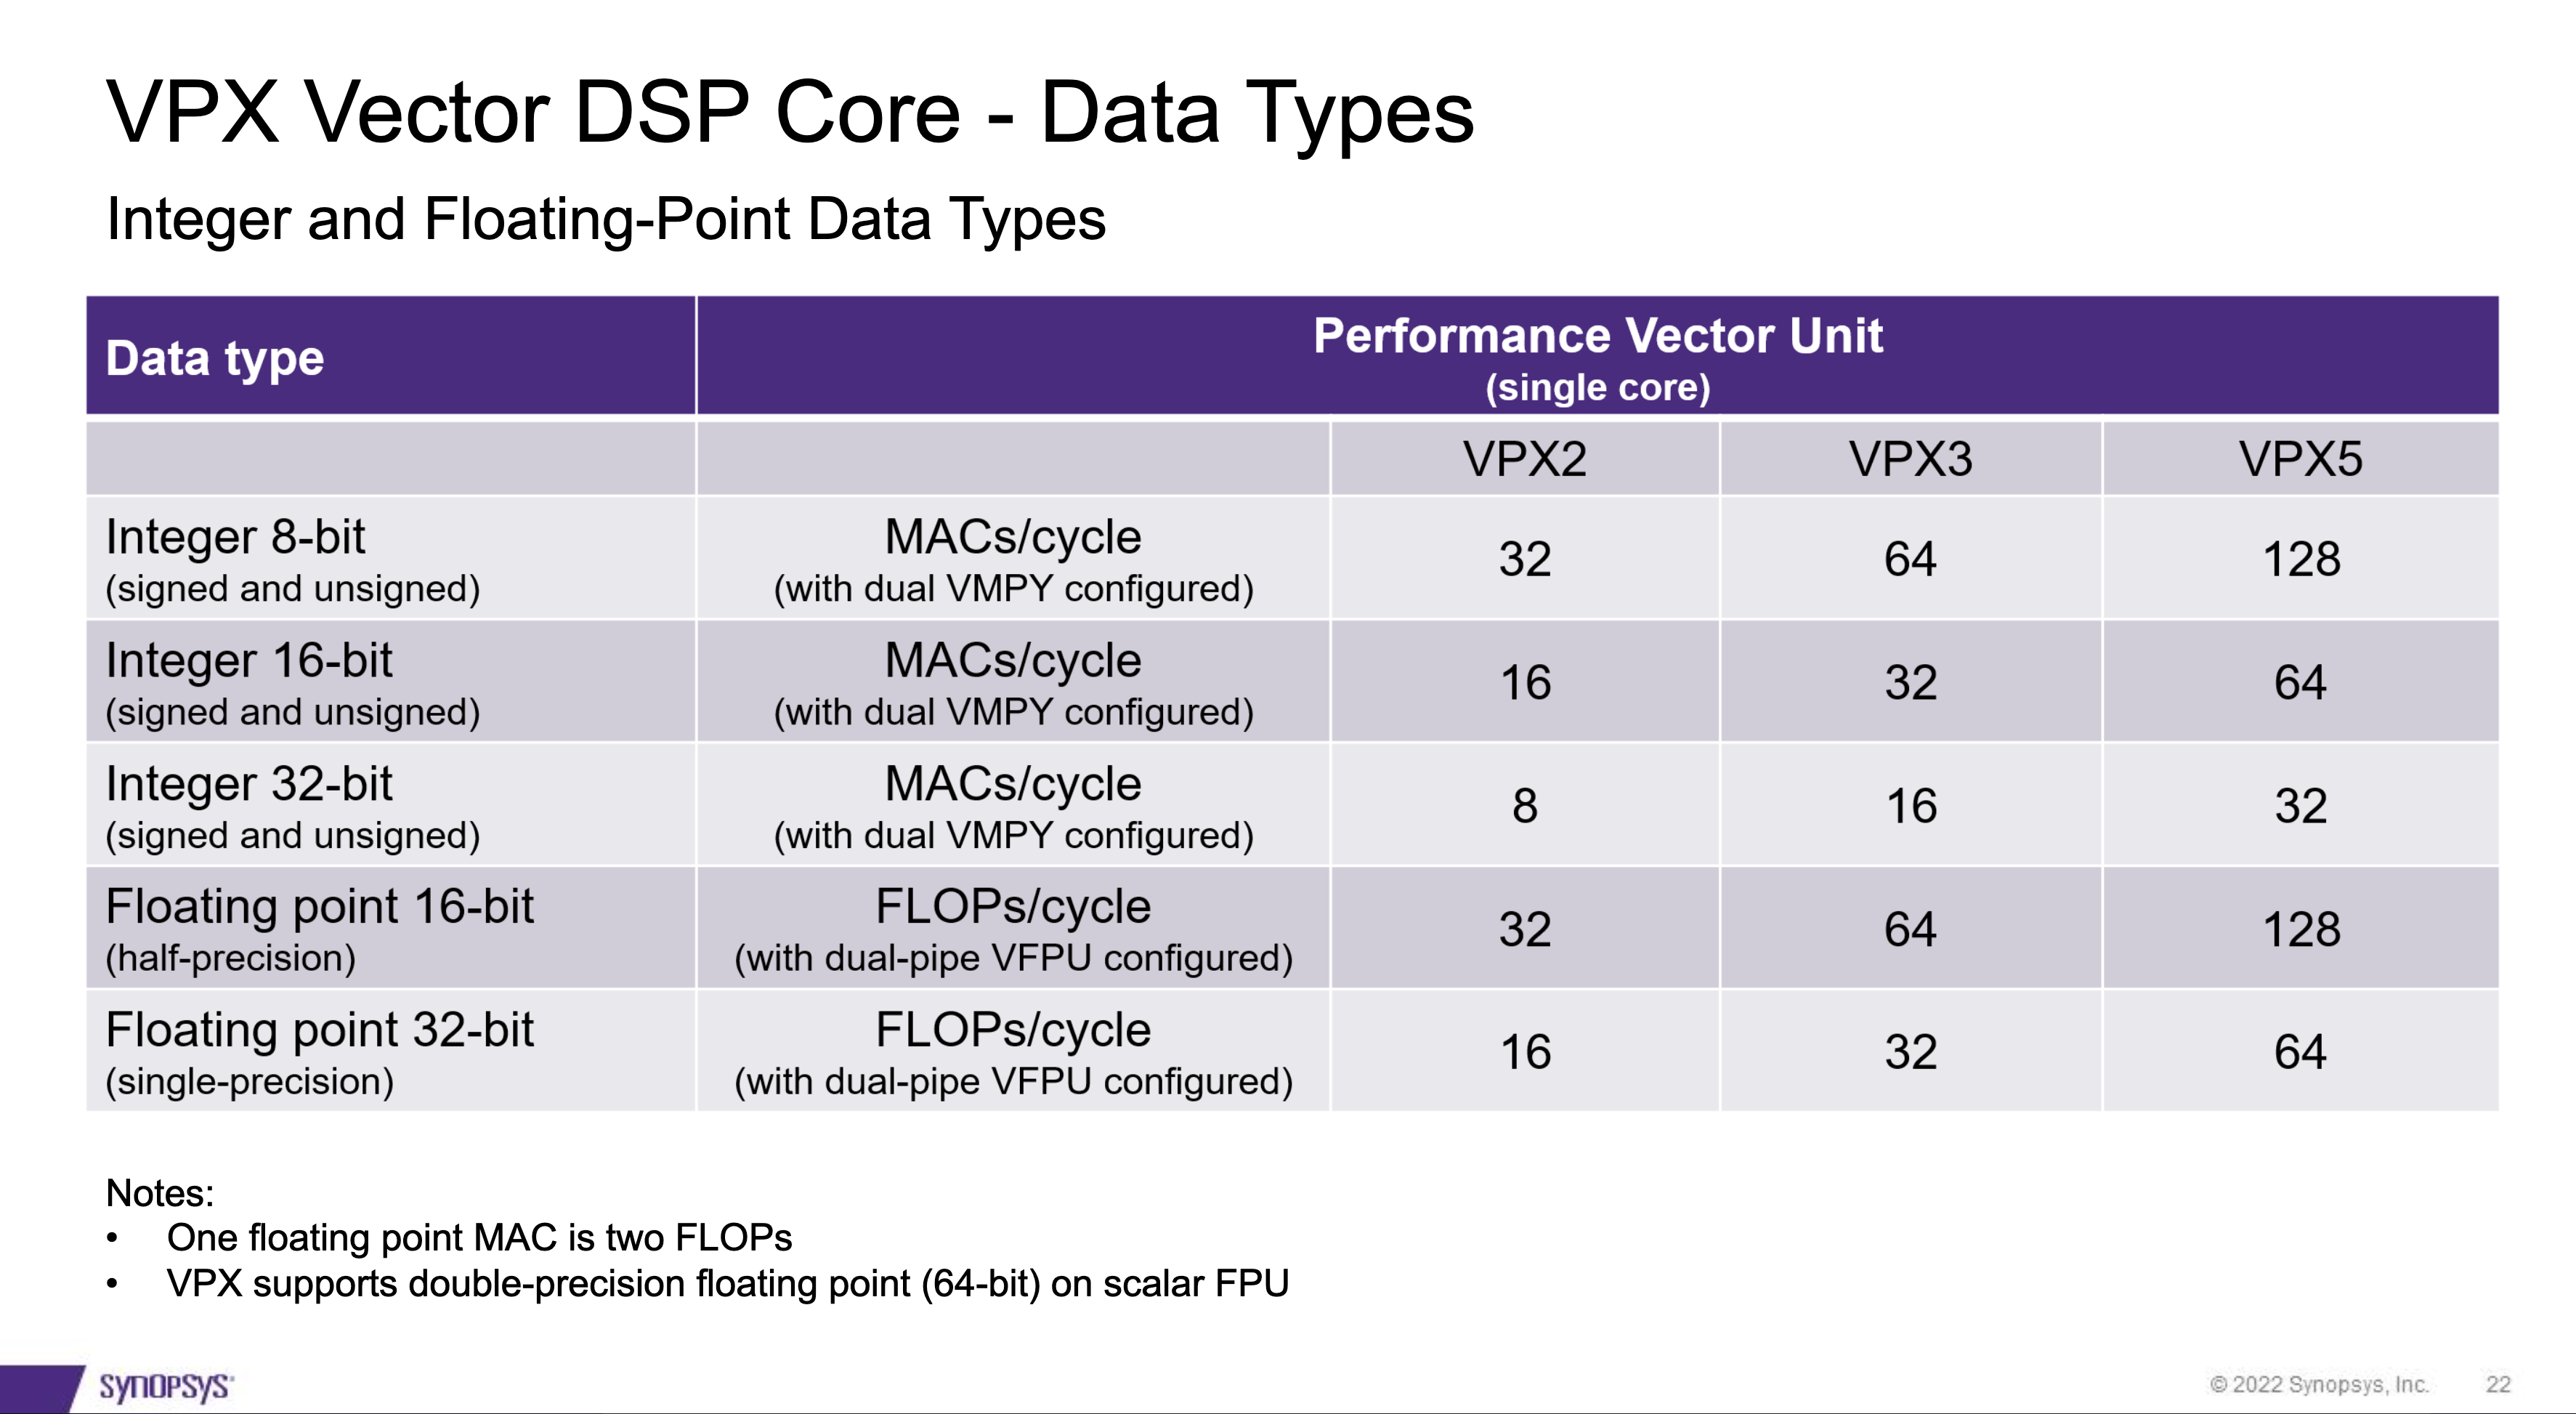 VPX Vector DSP Core Data Types